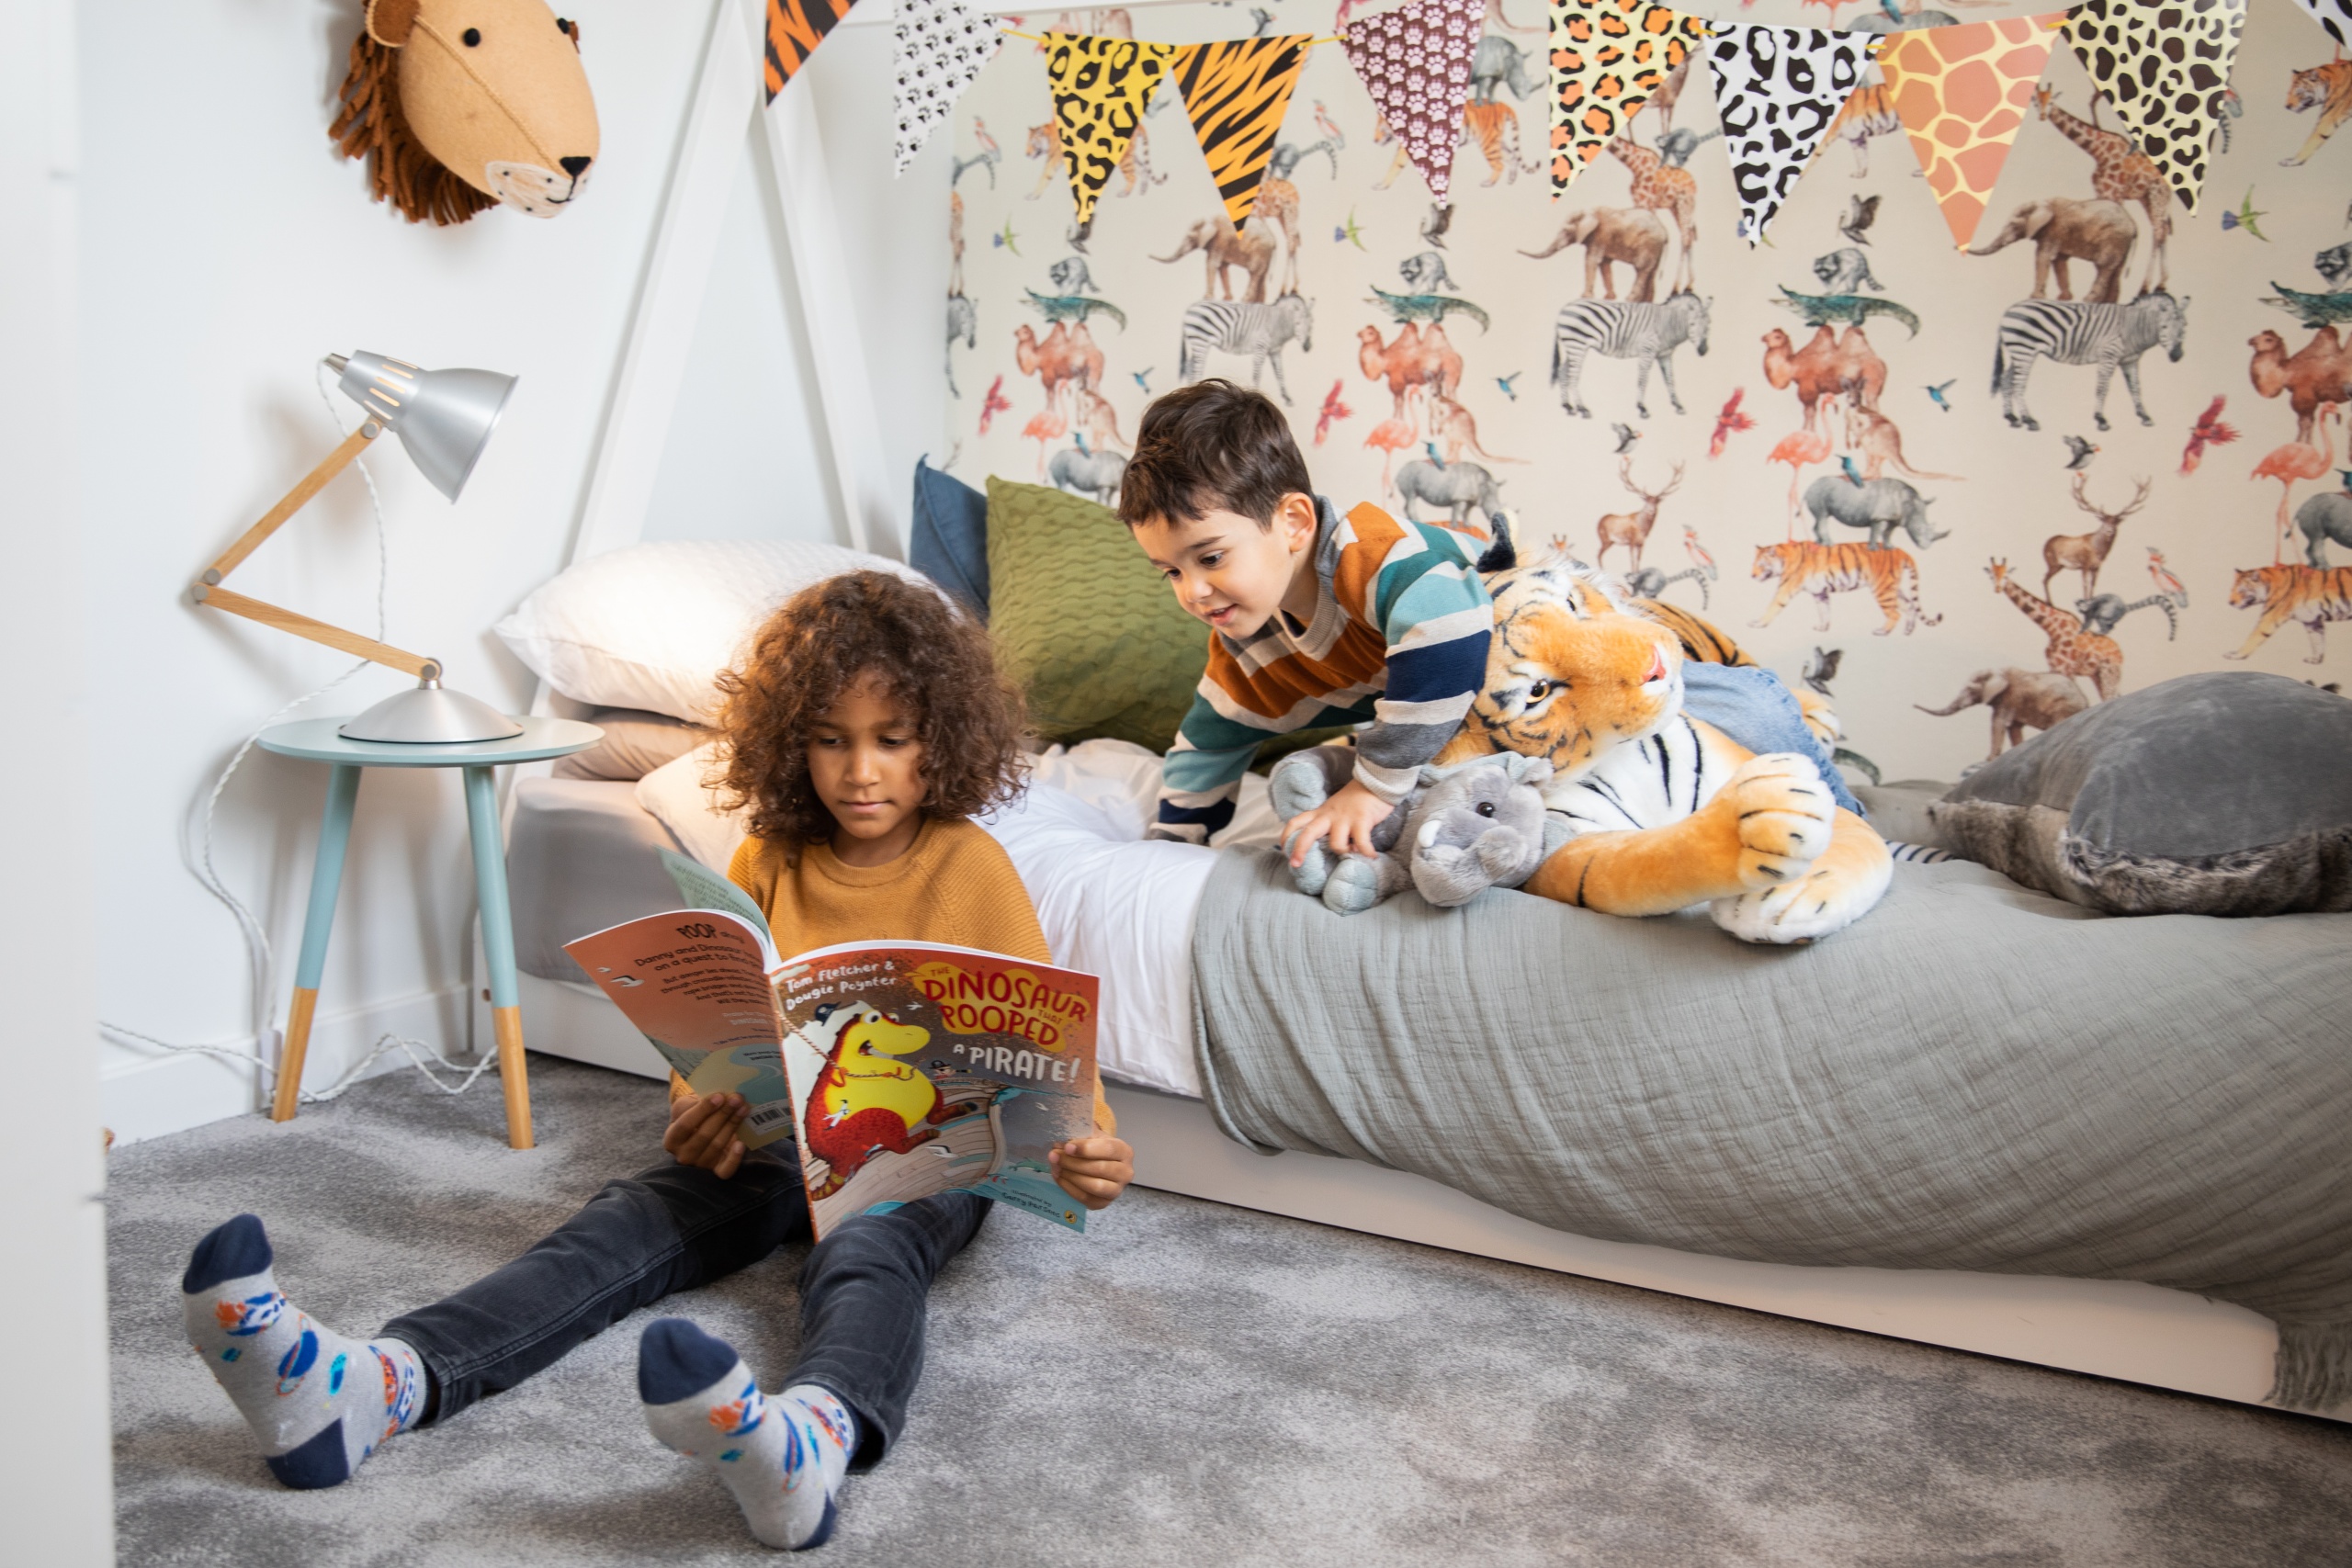 Two children sat with each other in a bedroom reading a children's book about dinosaurs